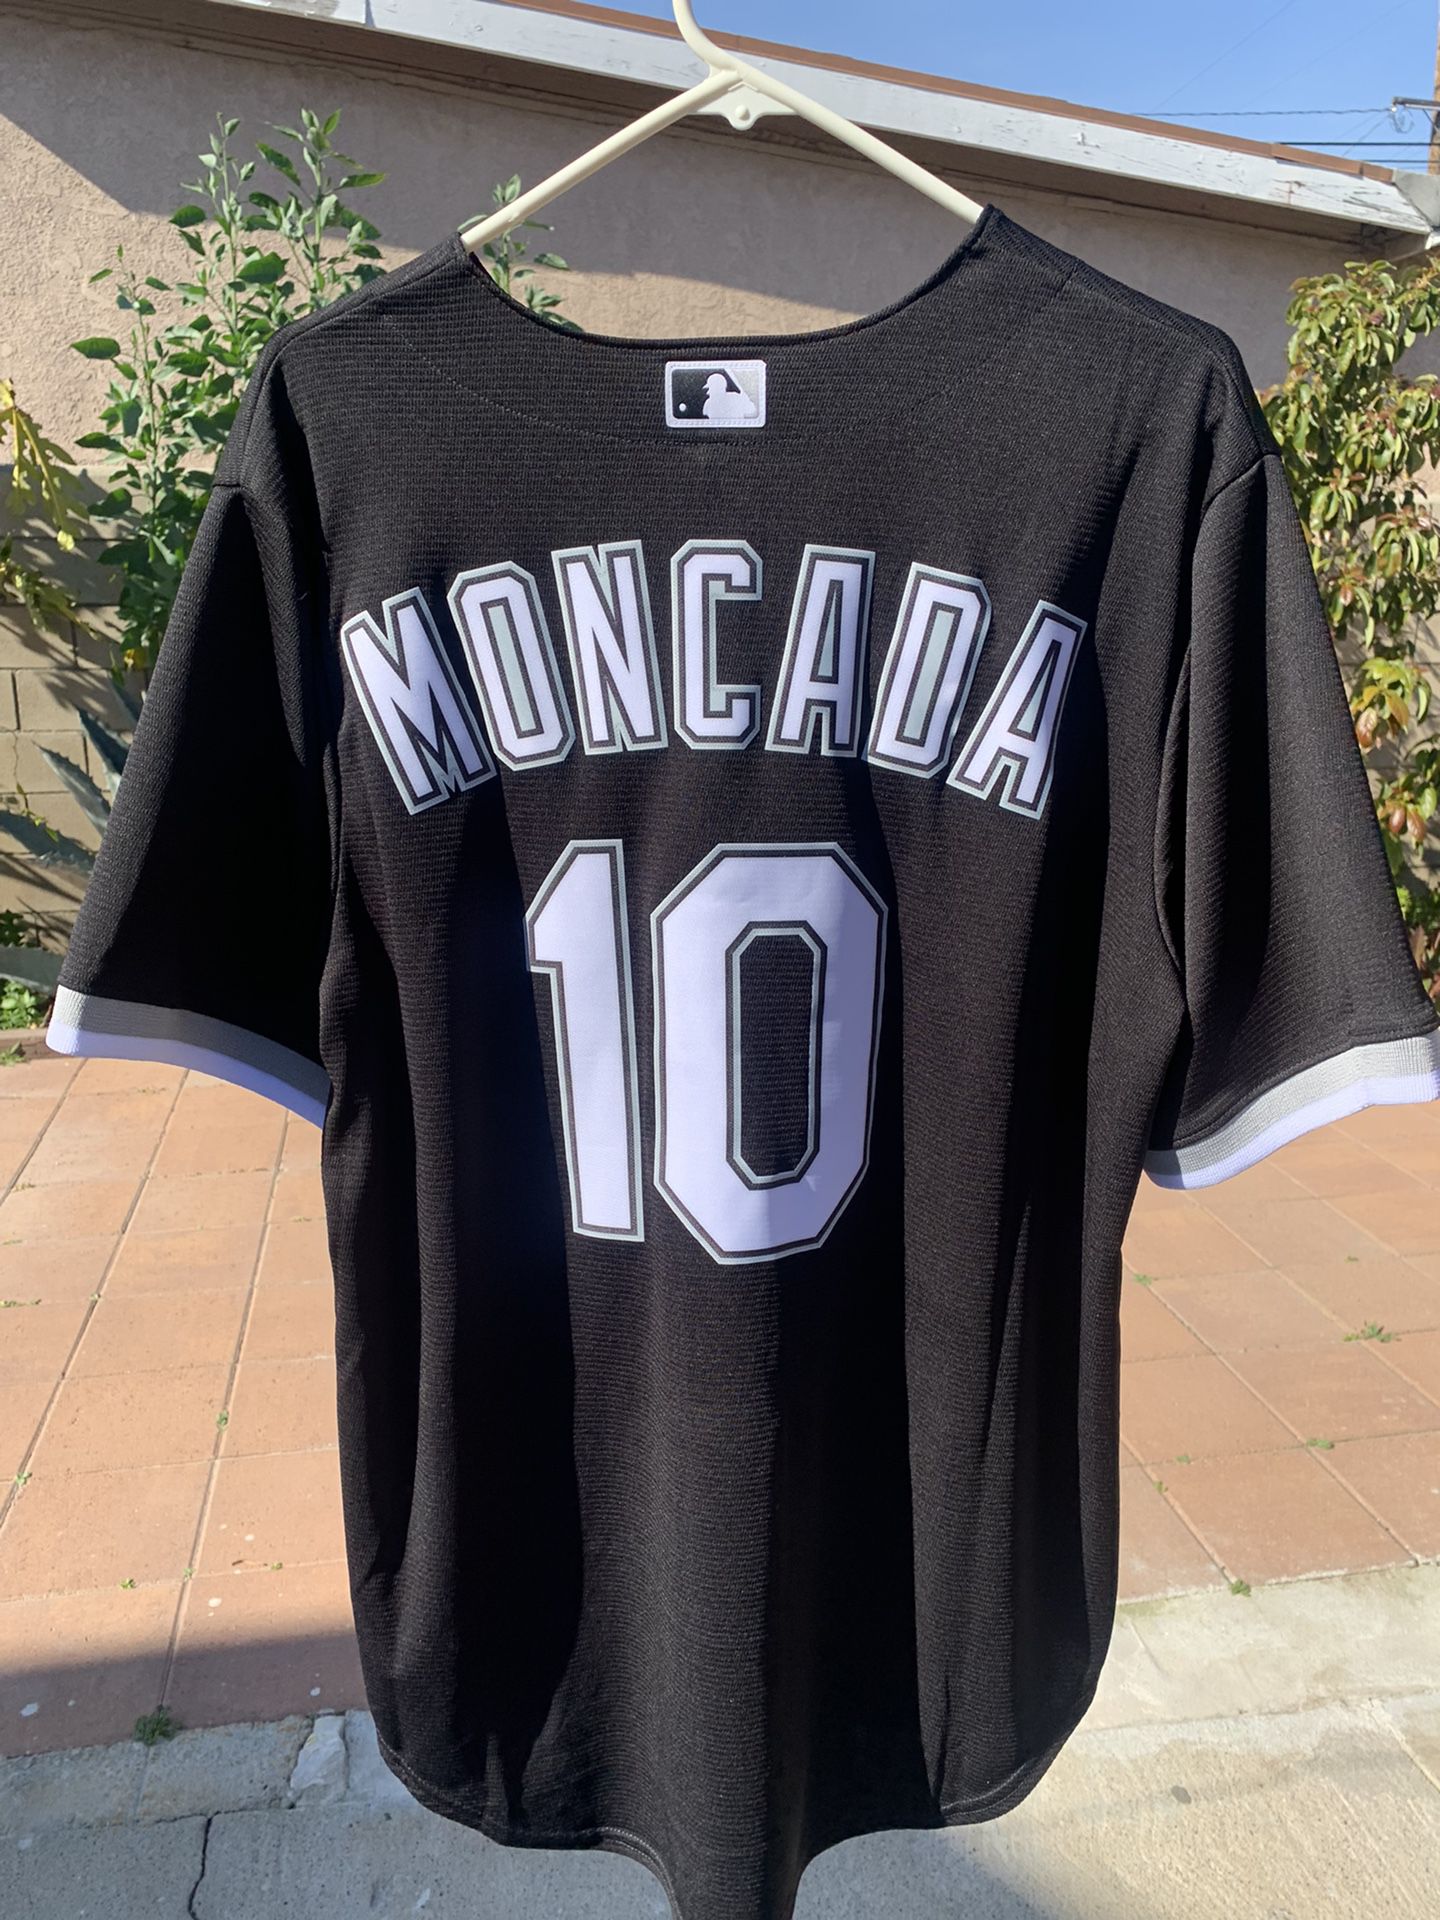 Nike White Sox Jersey - Southside Authentic - On Fiel for Sale in West  Covina, CA - OfferUp